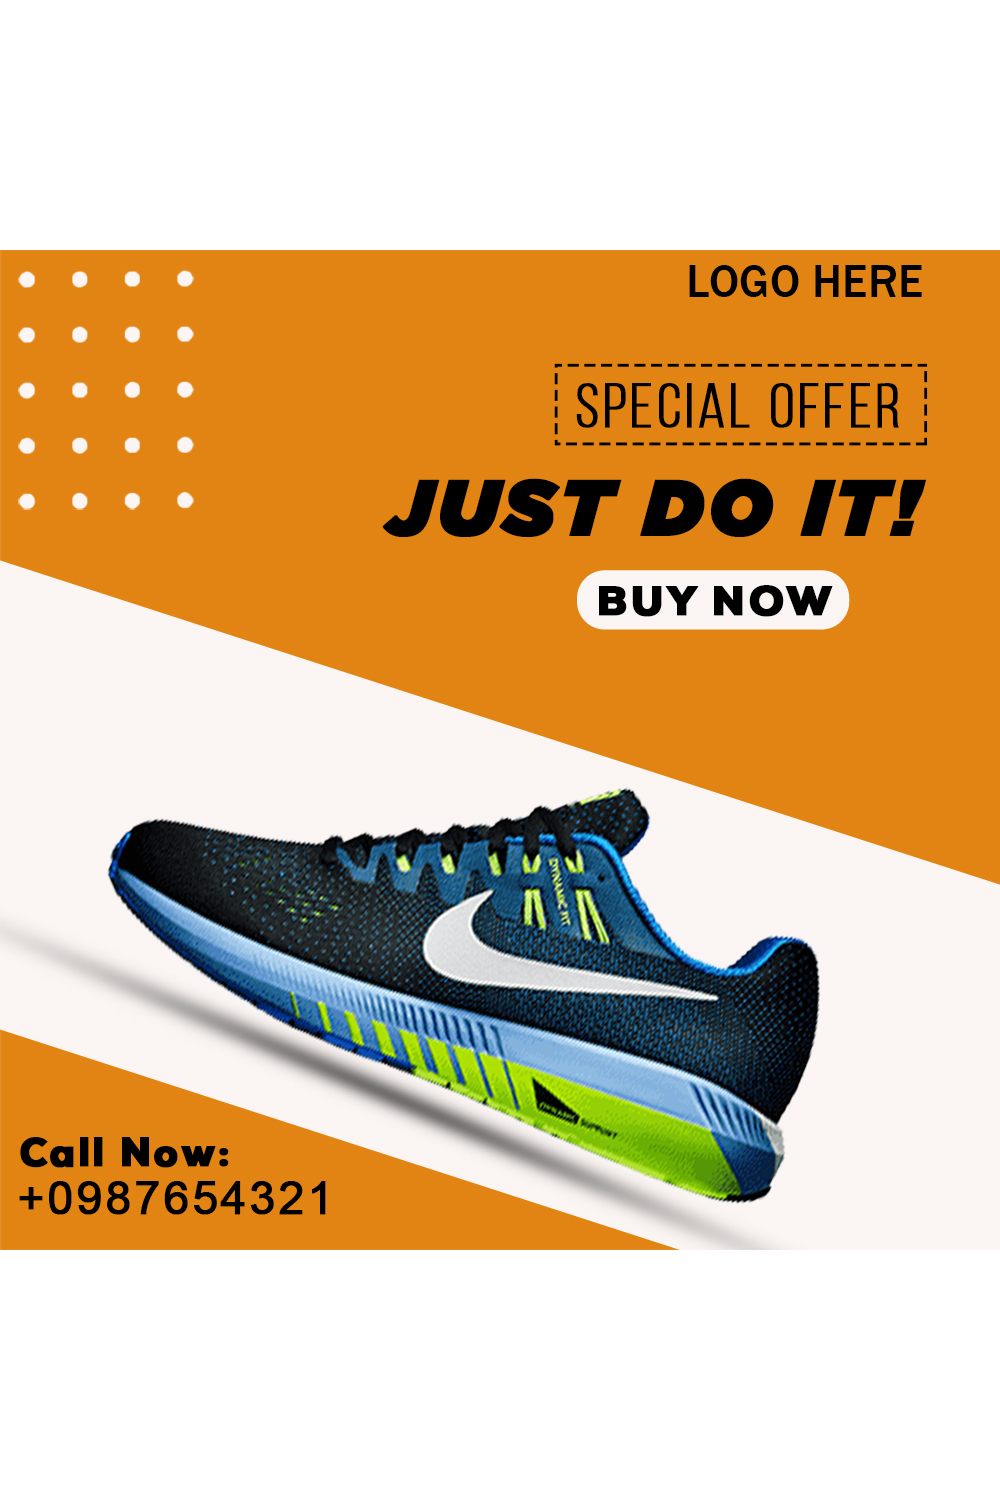 Social Media Post Design for Sports shoes pinterest preview image.